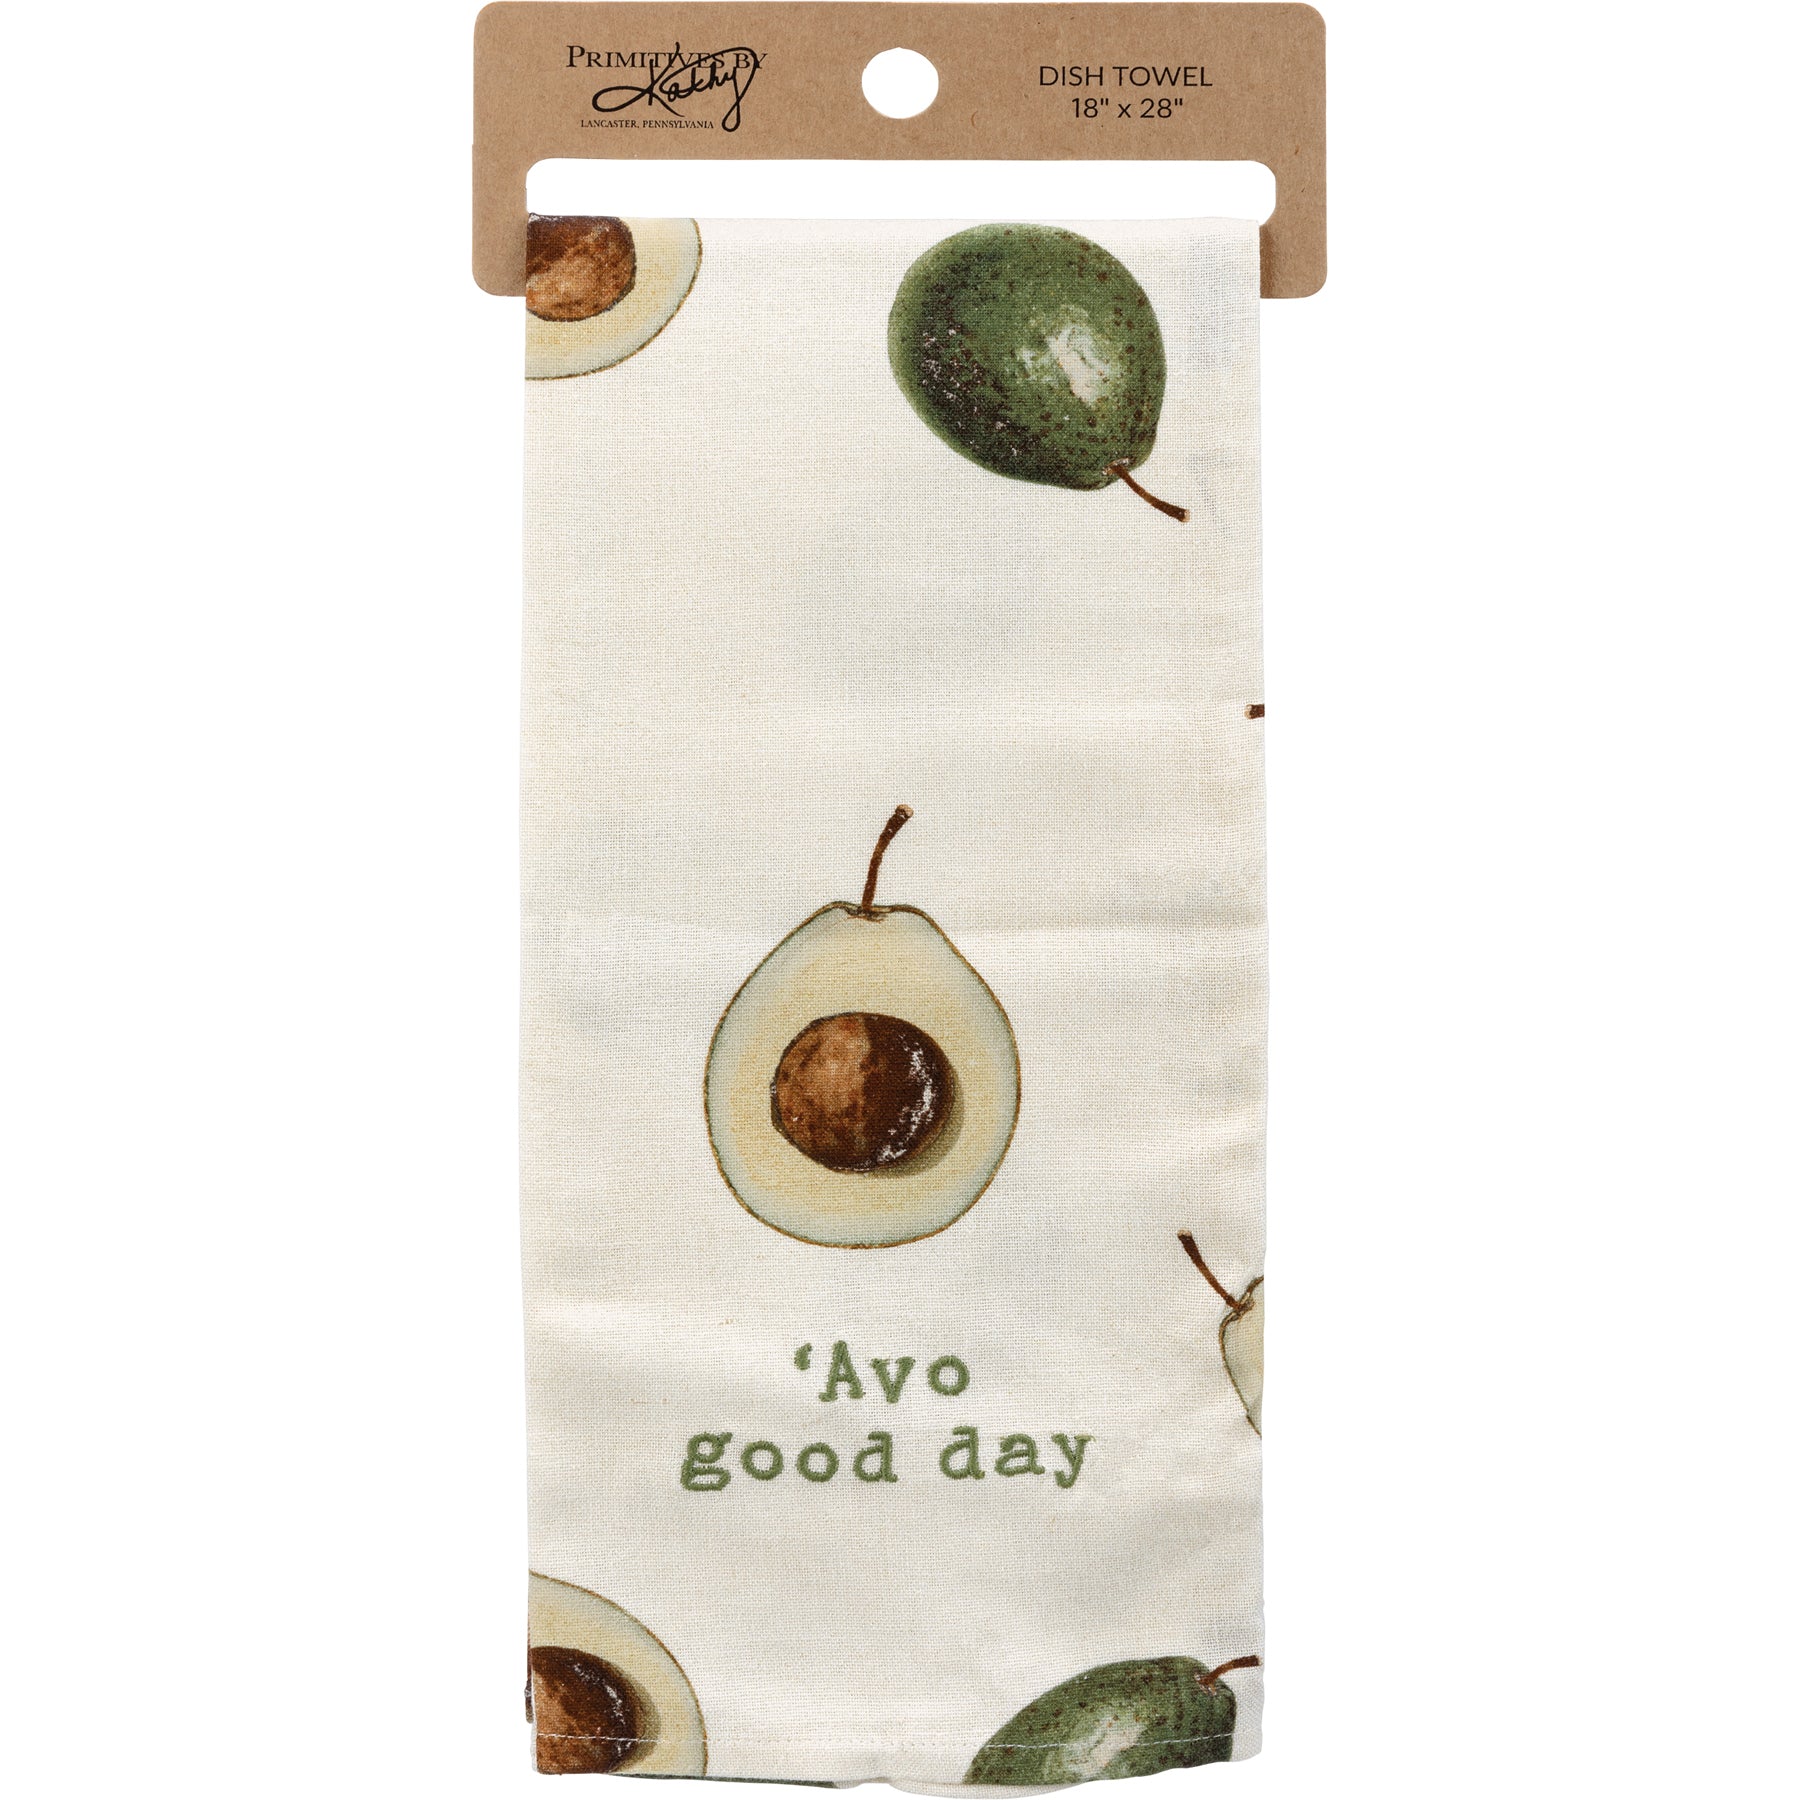 'Avo Good Day Funny Snarky Dish Cloth Towel | Cotton Linen | Embroidered Text | 18" x 28"